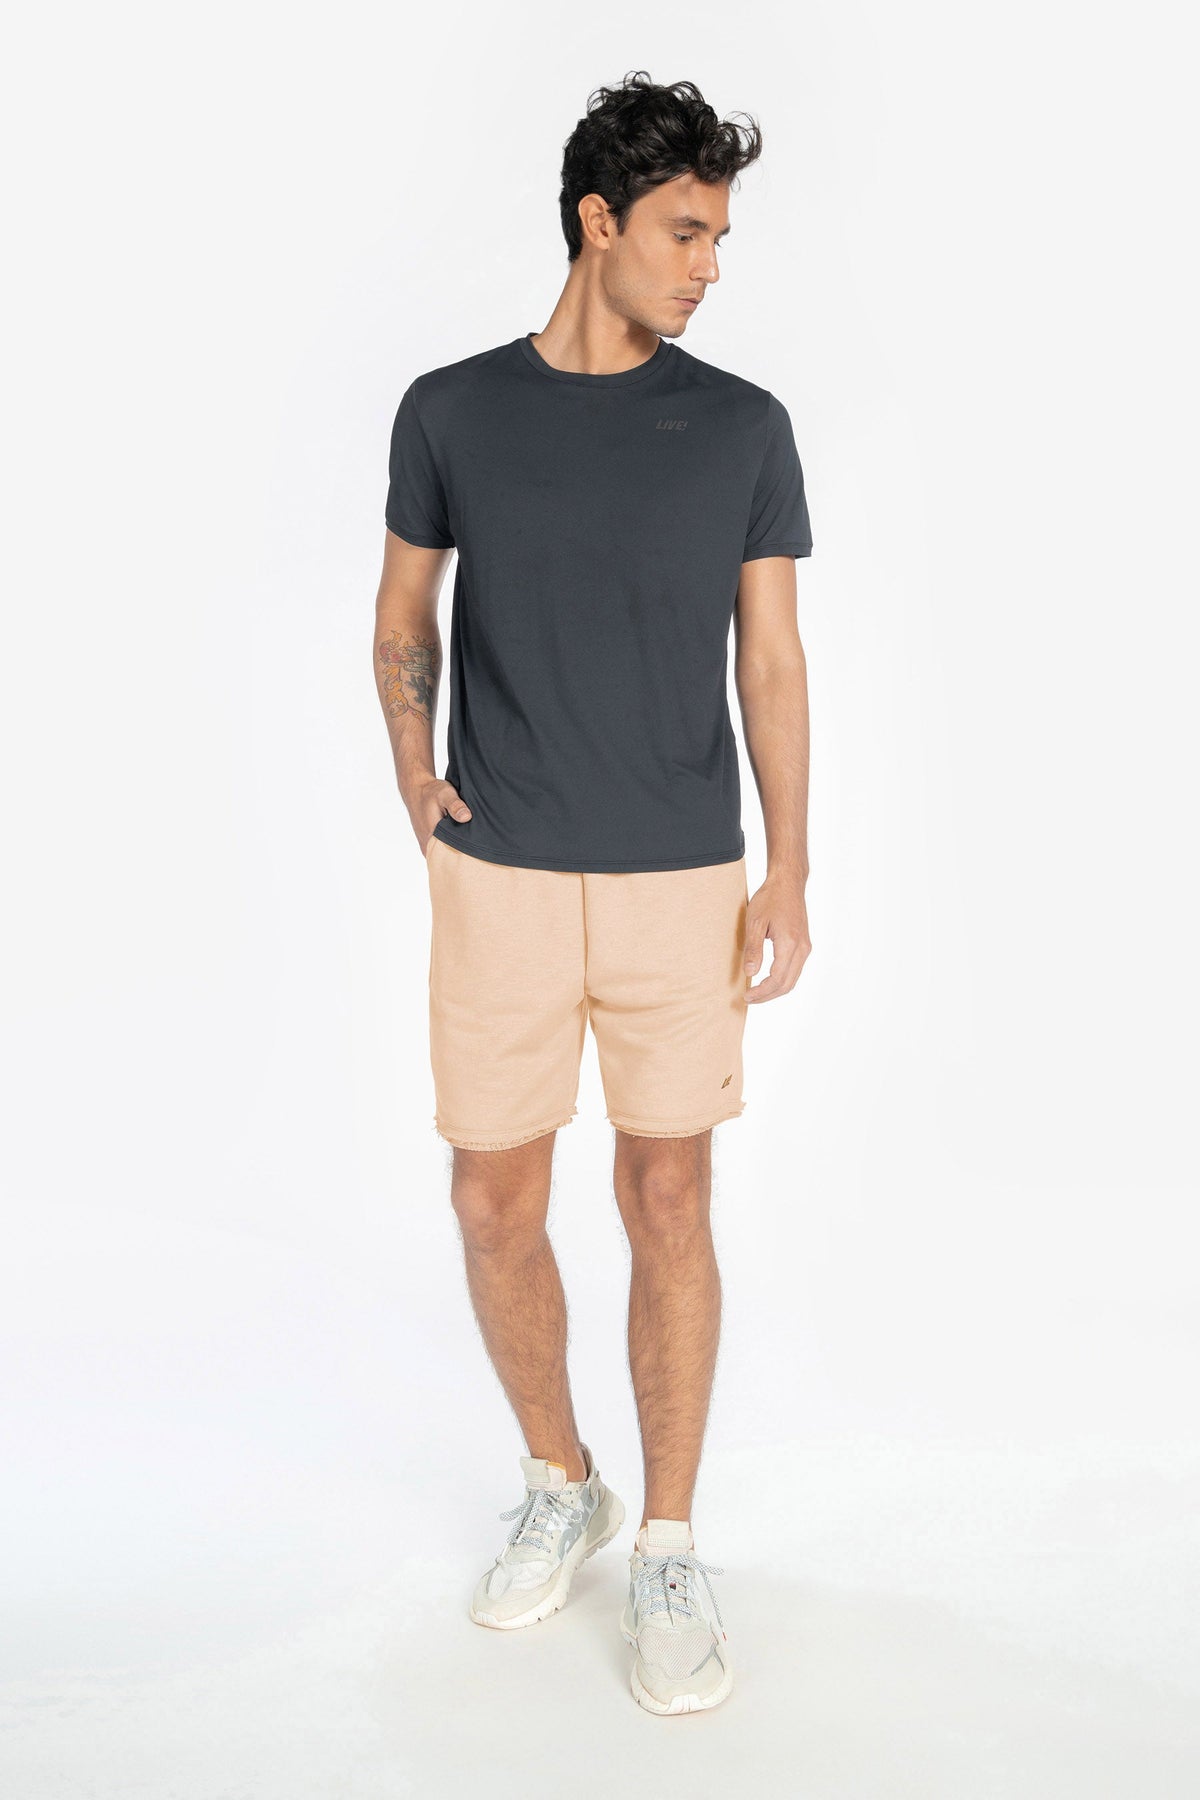 Essential Liveliness Lounge Shorties